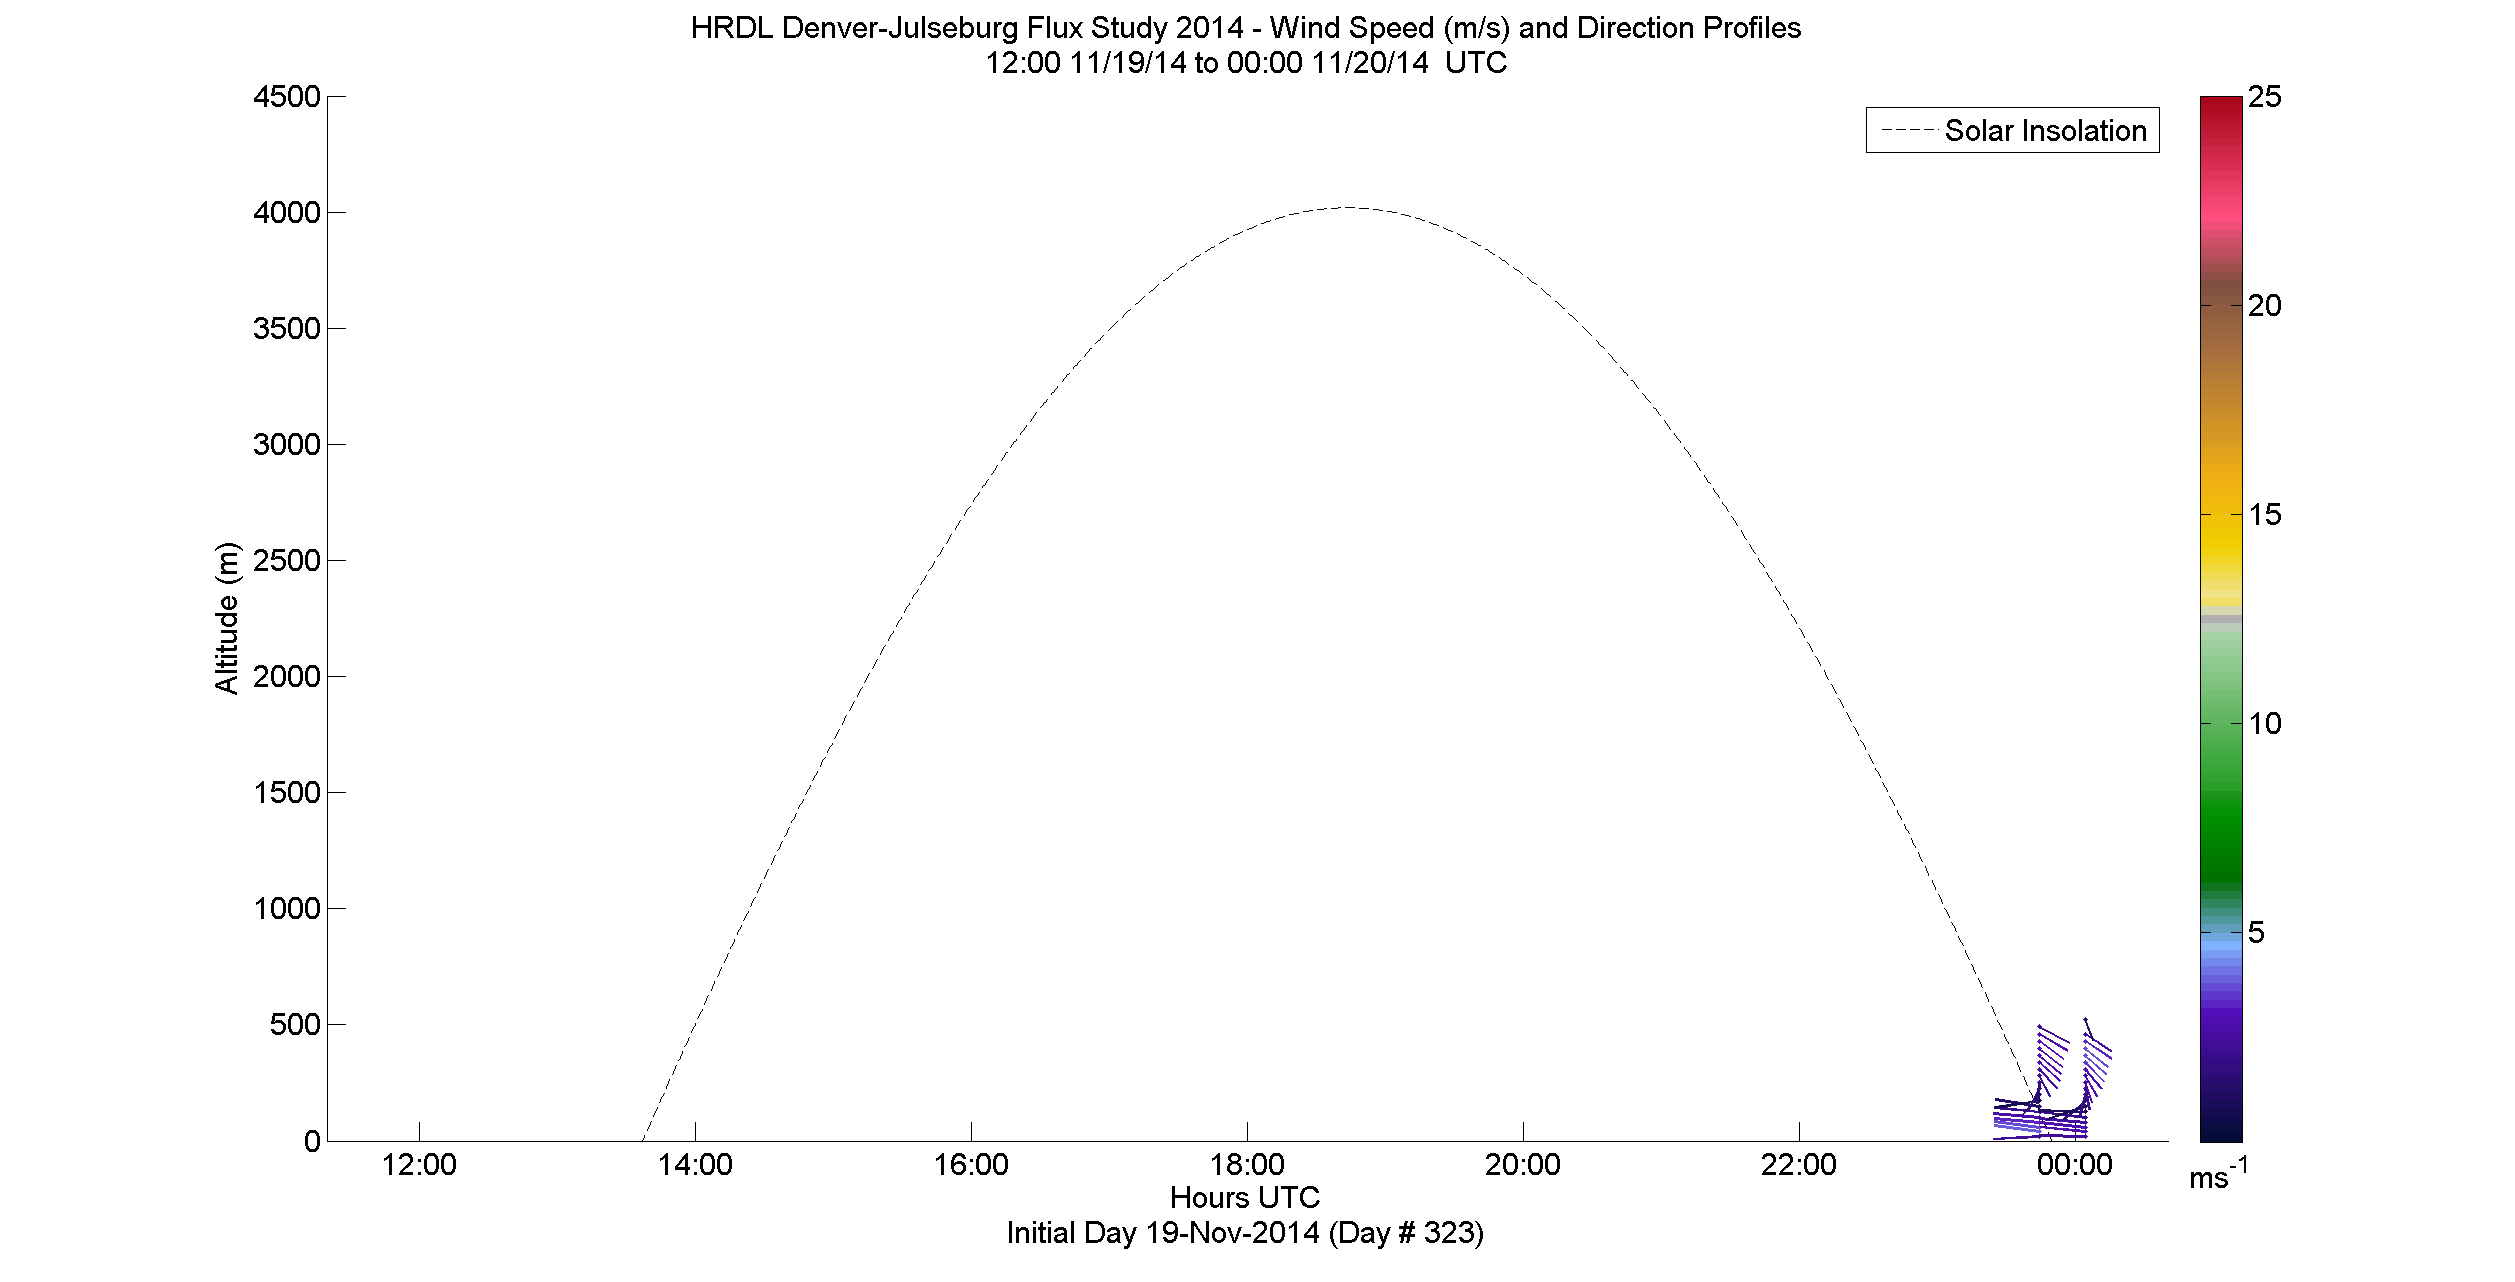 HRDL speed and direction profile - November 19 pm